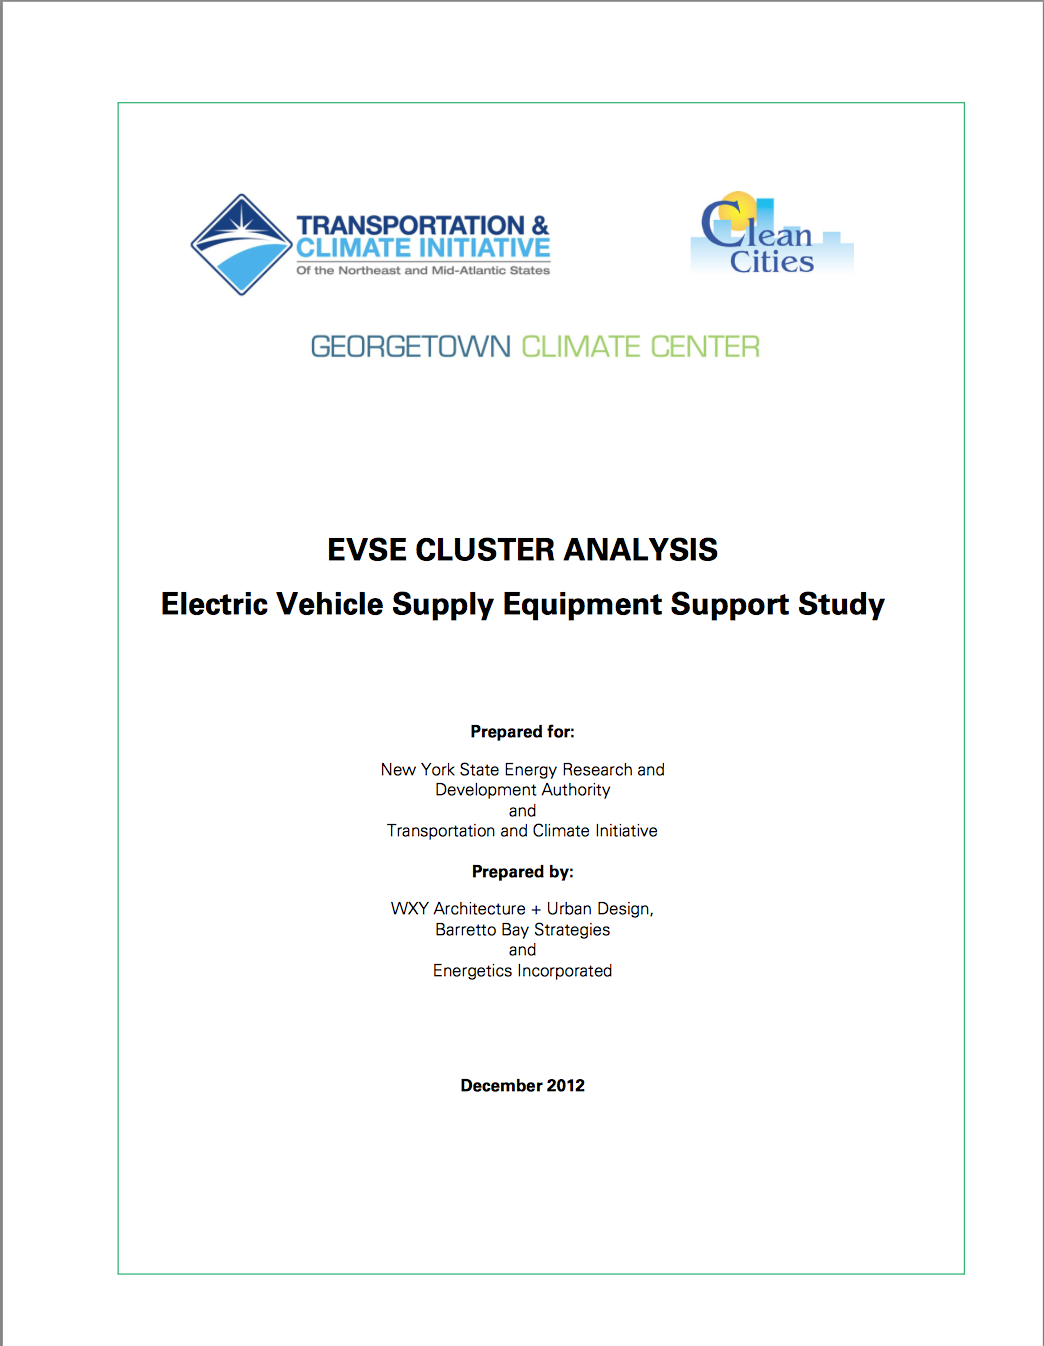 Electric Vehicle Supply Equipment Cluster Analysis